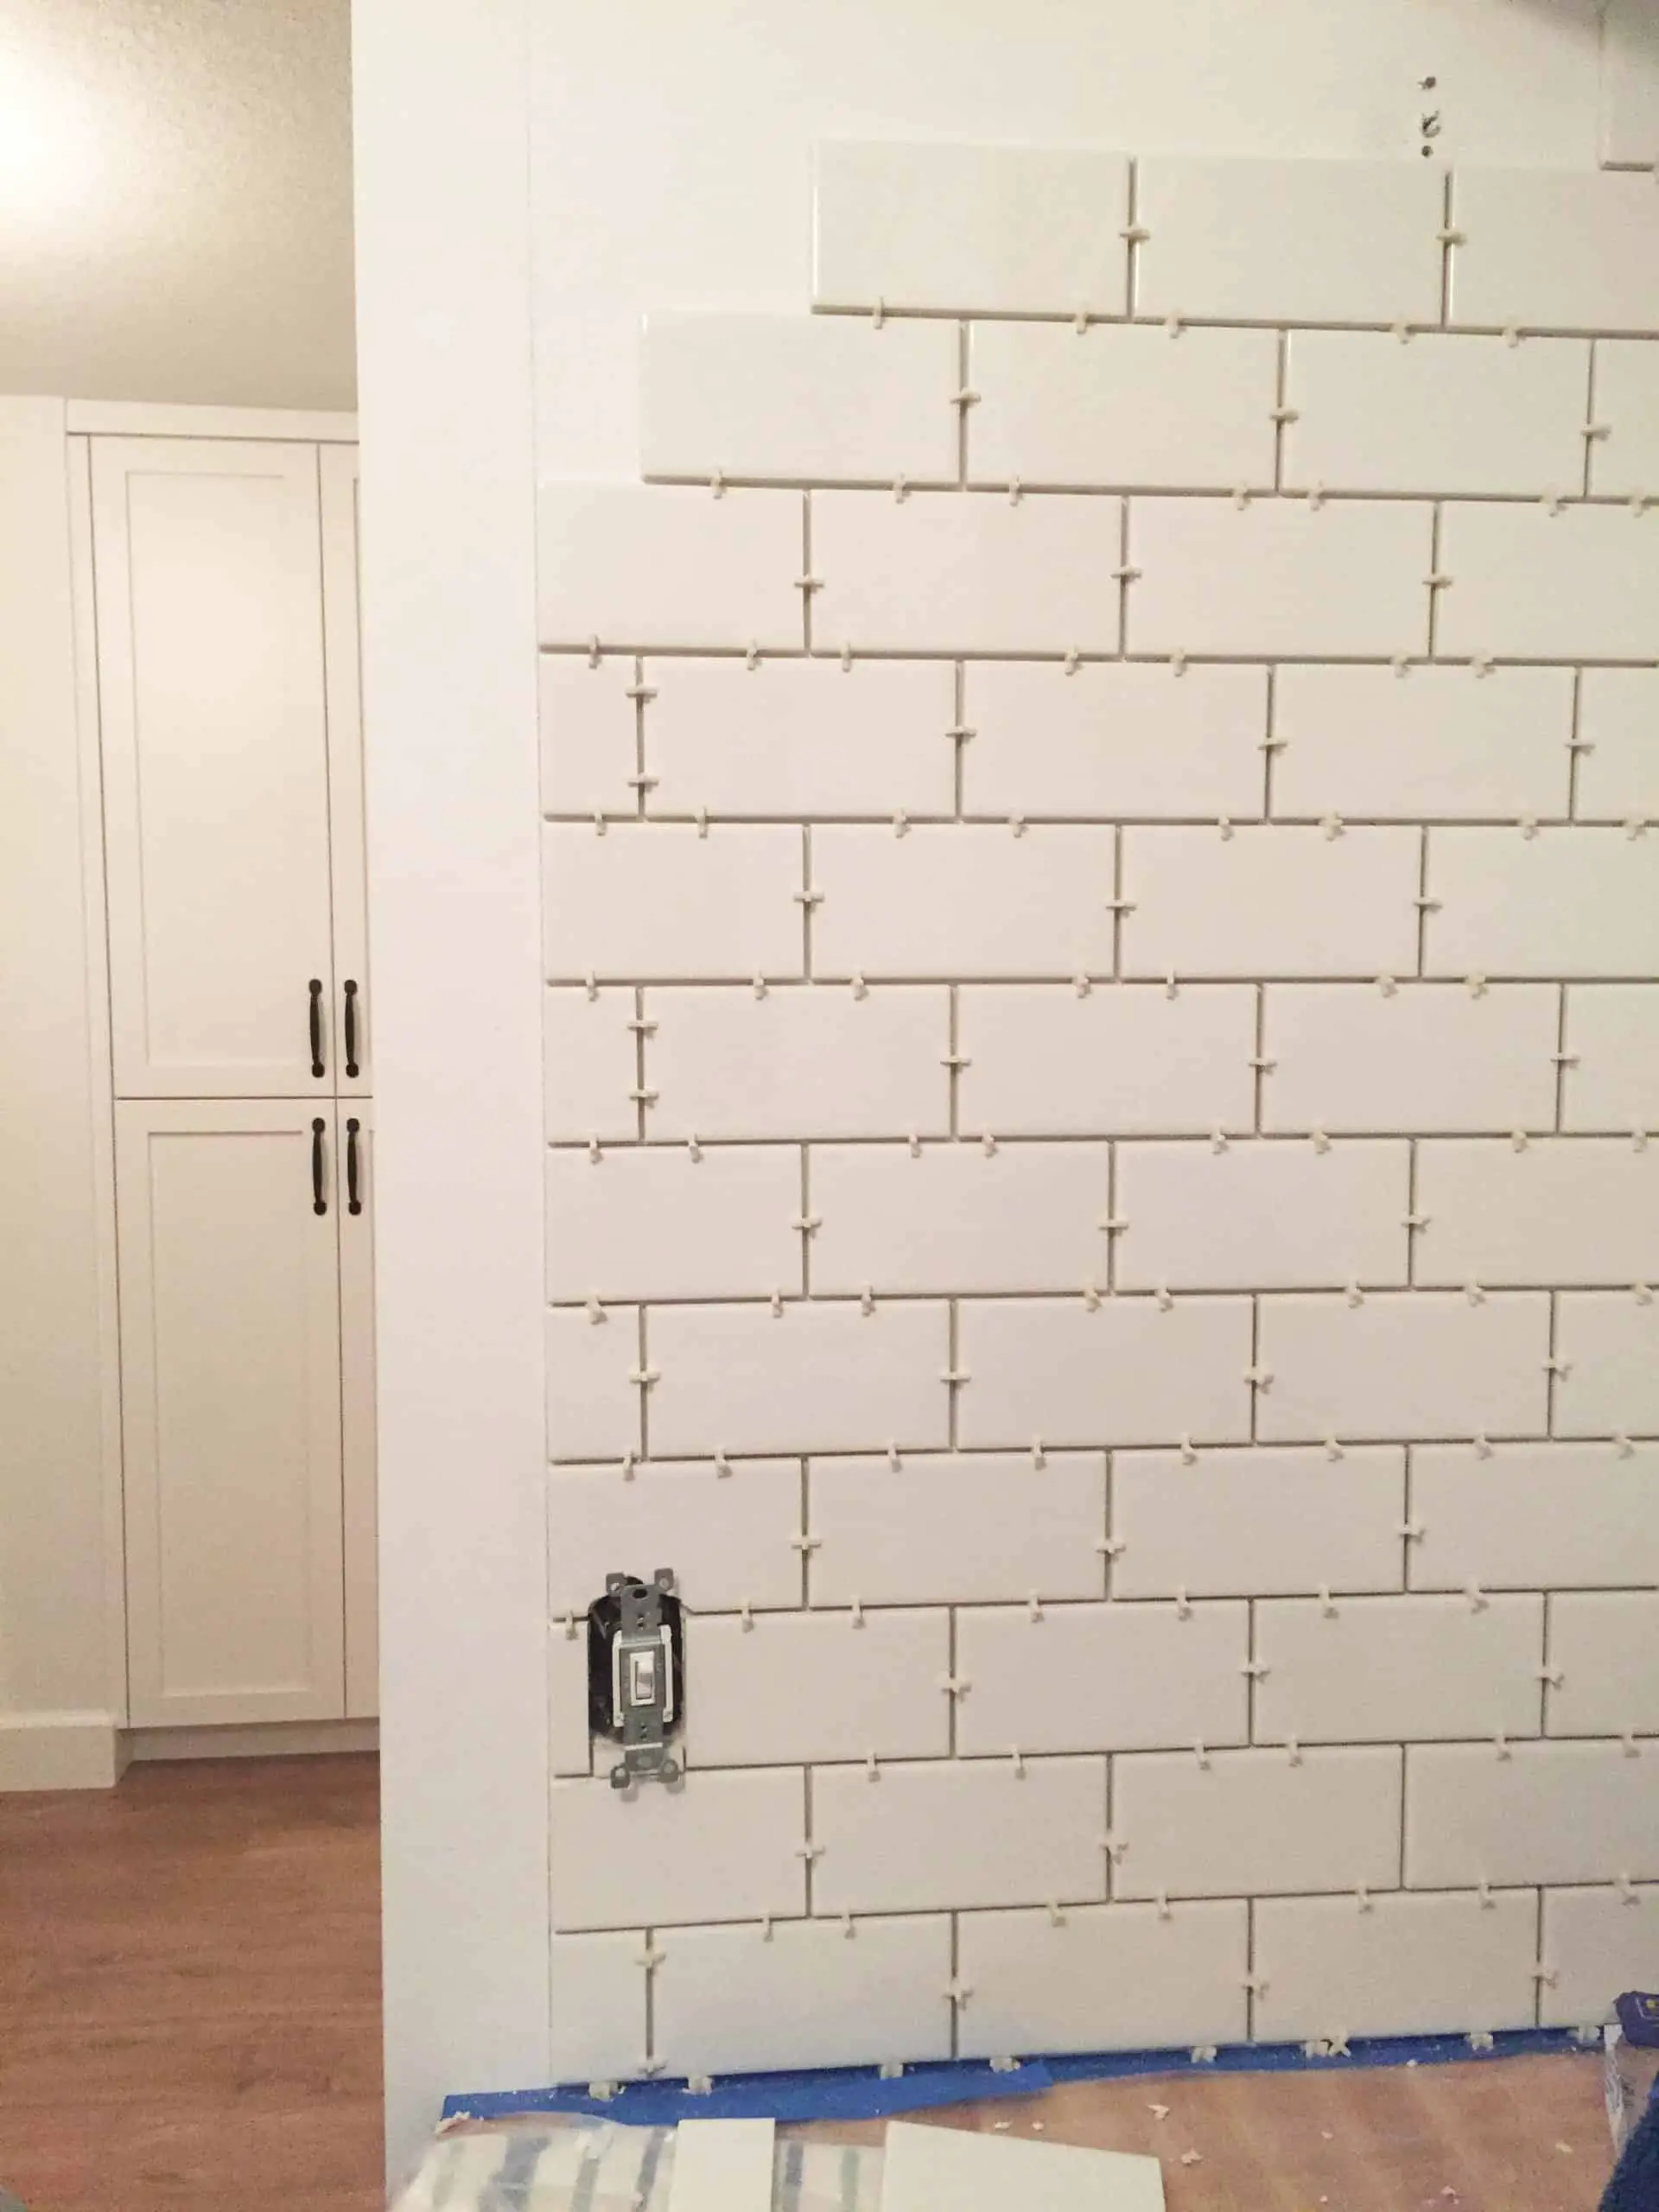 My Best Subway Tile Backsplash, What Is The Best Spacing For Subway Tile